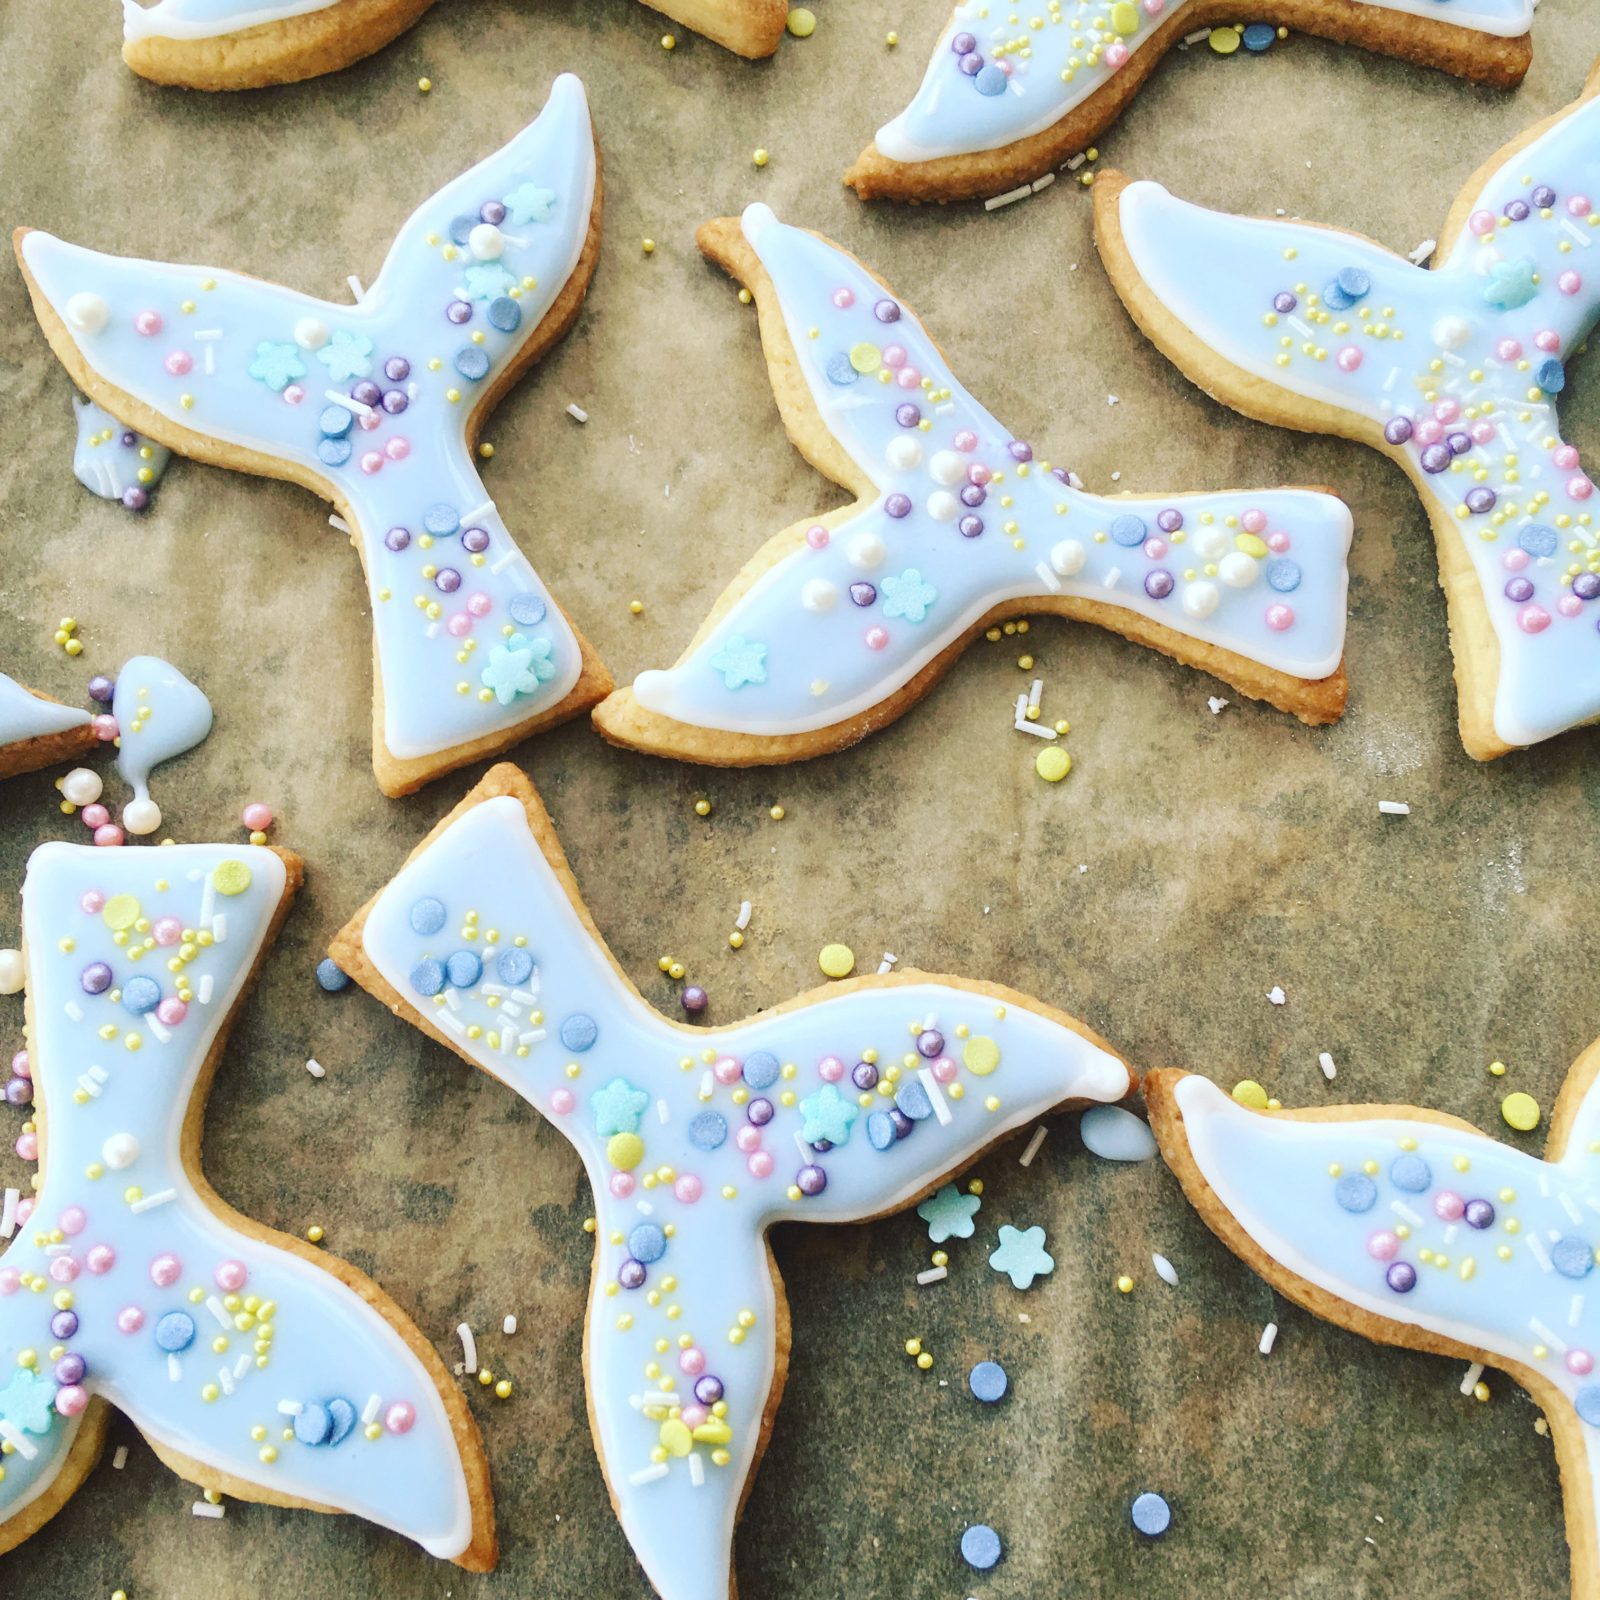 Naturally decorated biscuits from Litty's Larder